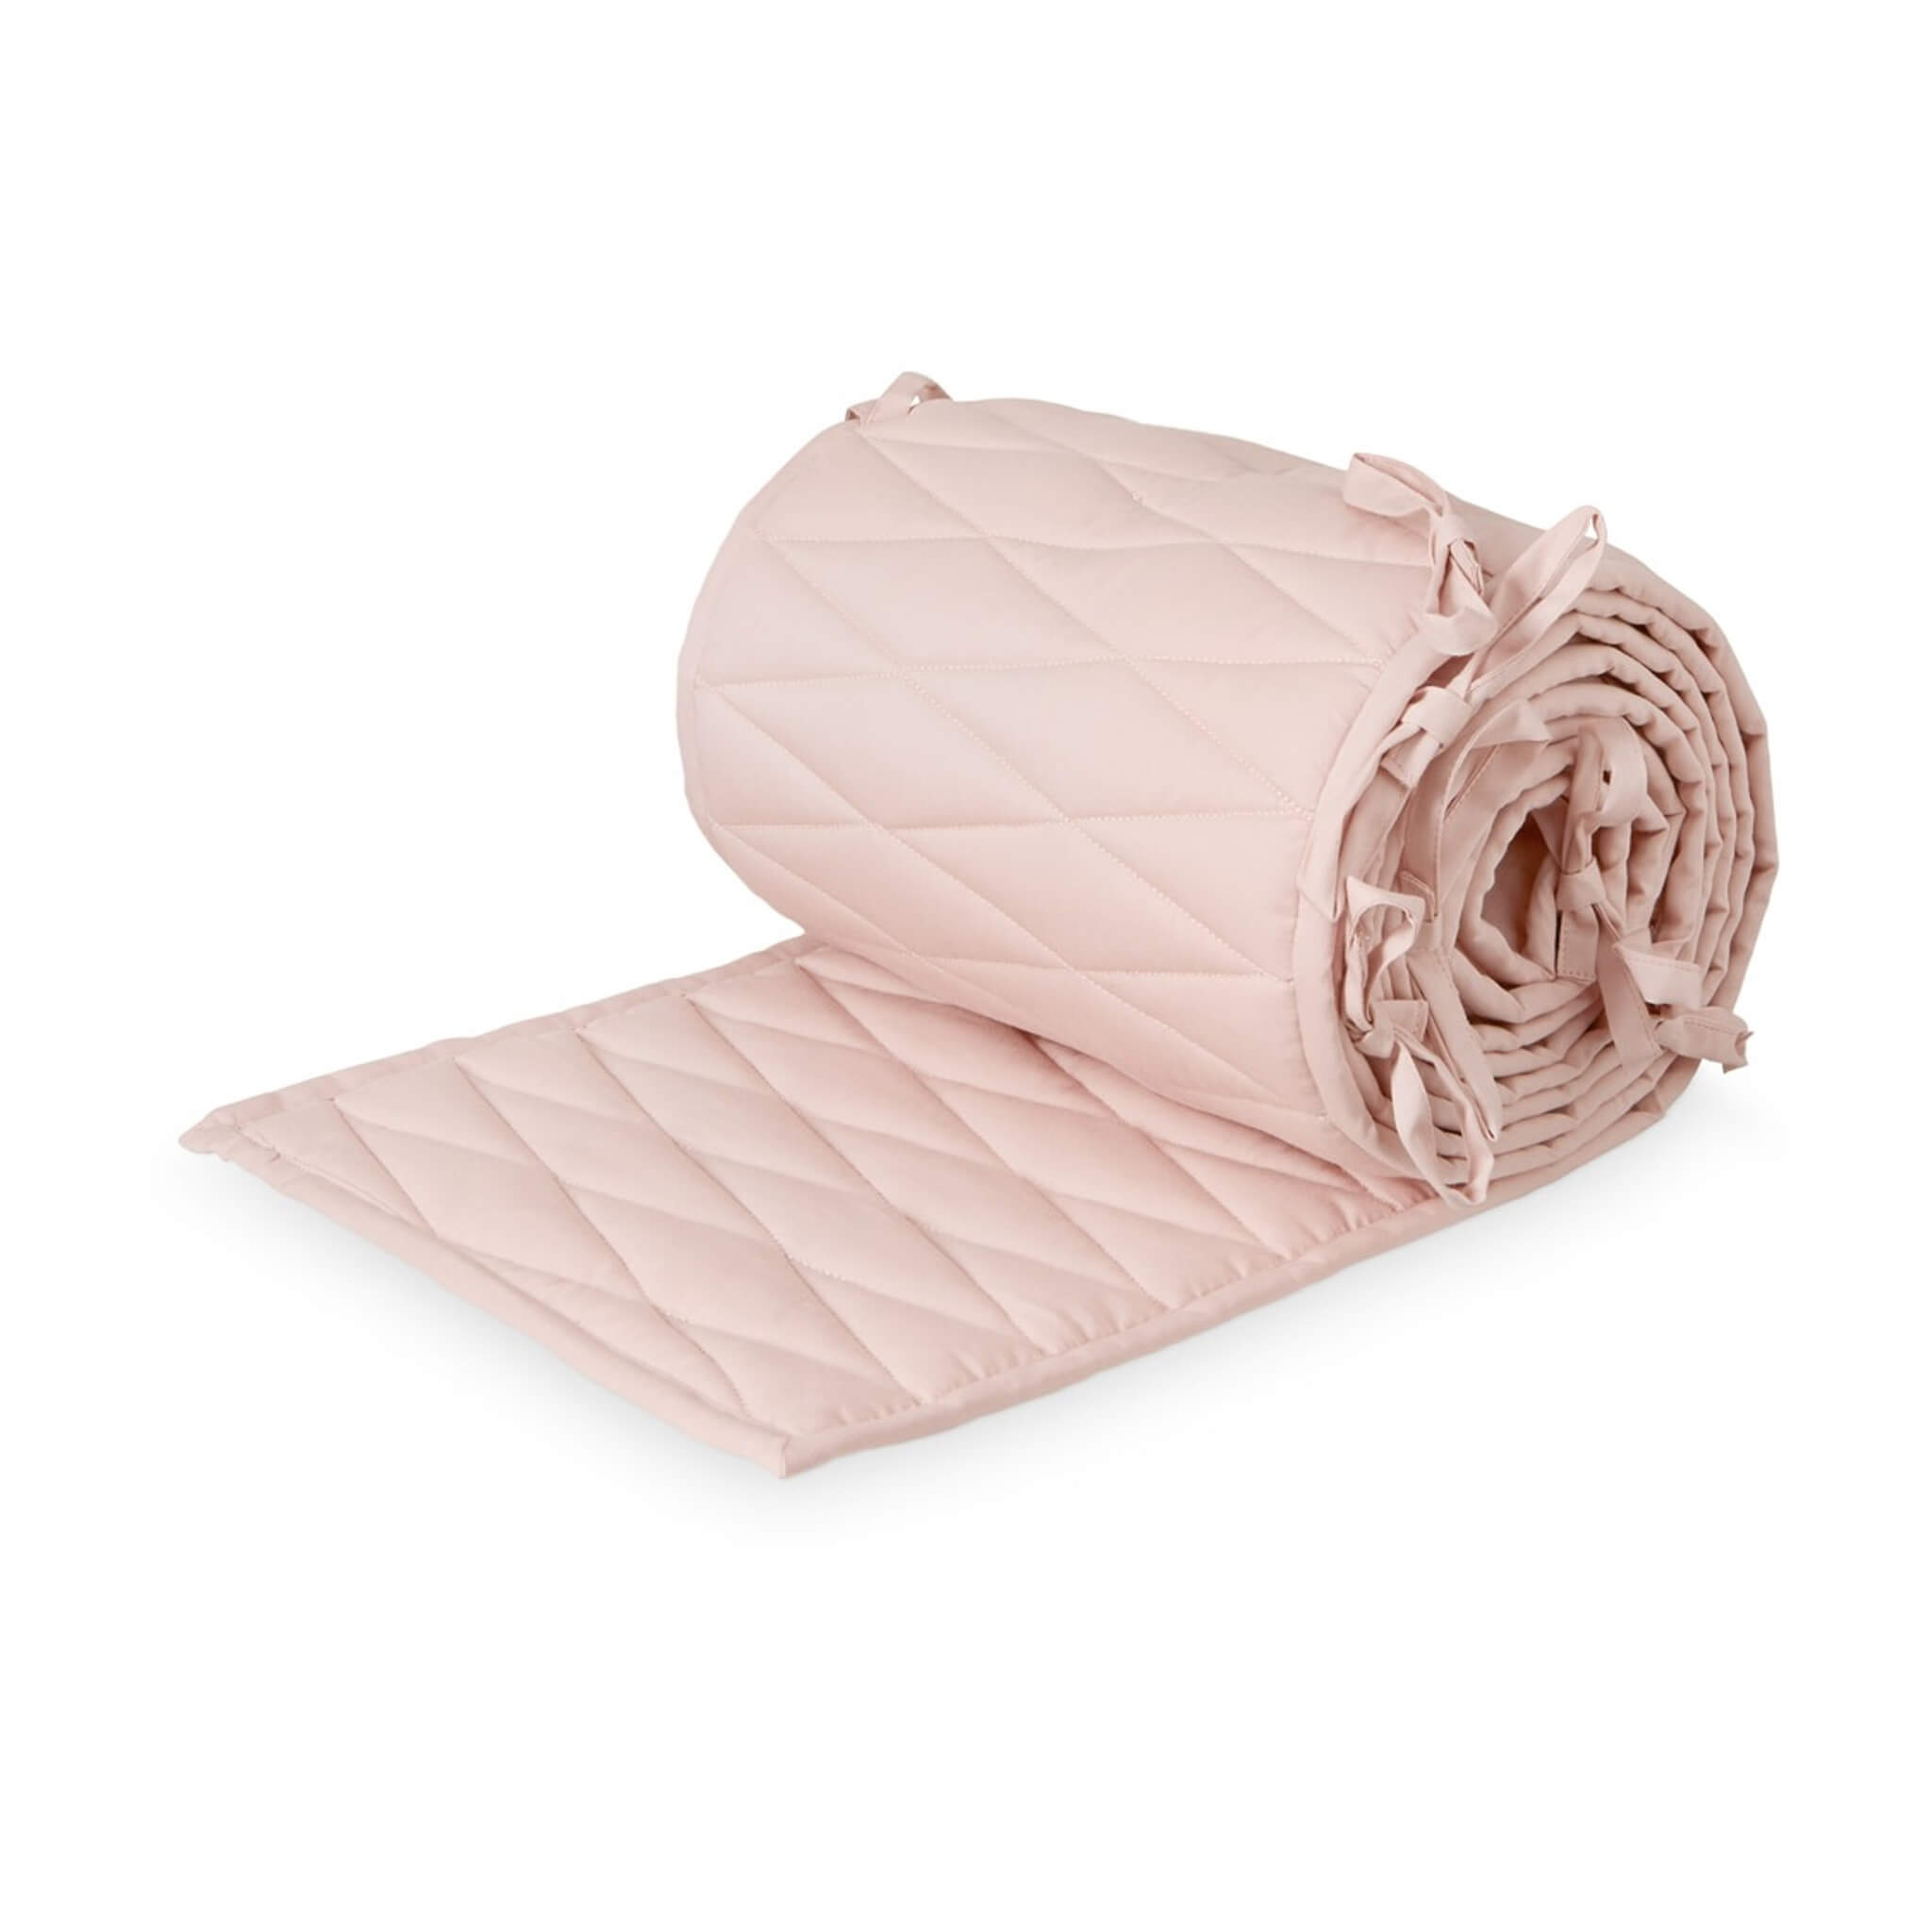 Quilted Cot Bumper - Rose